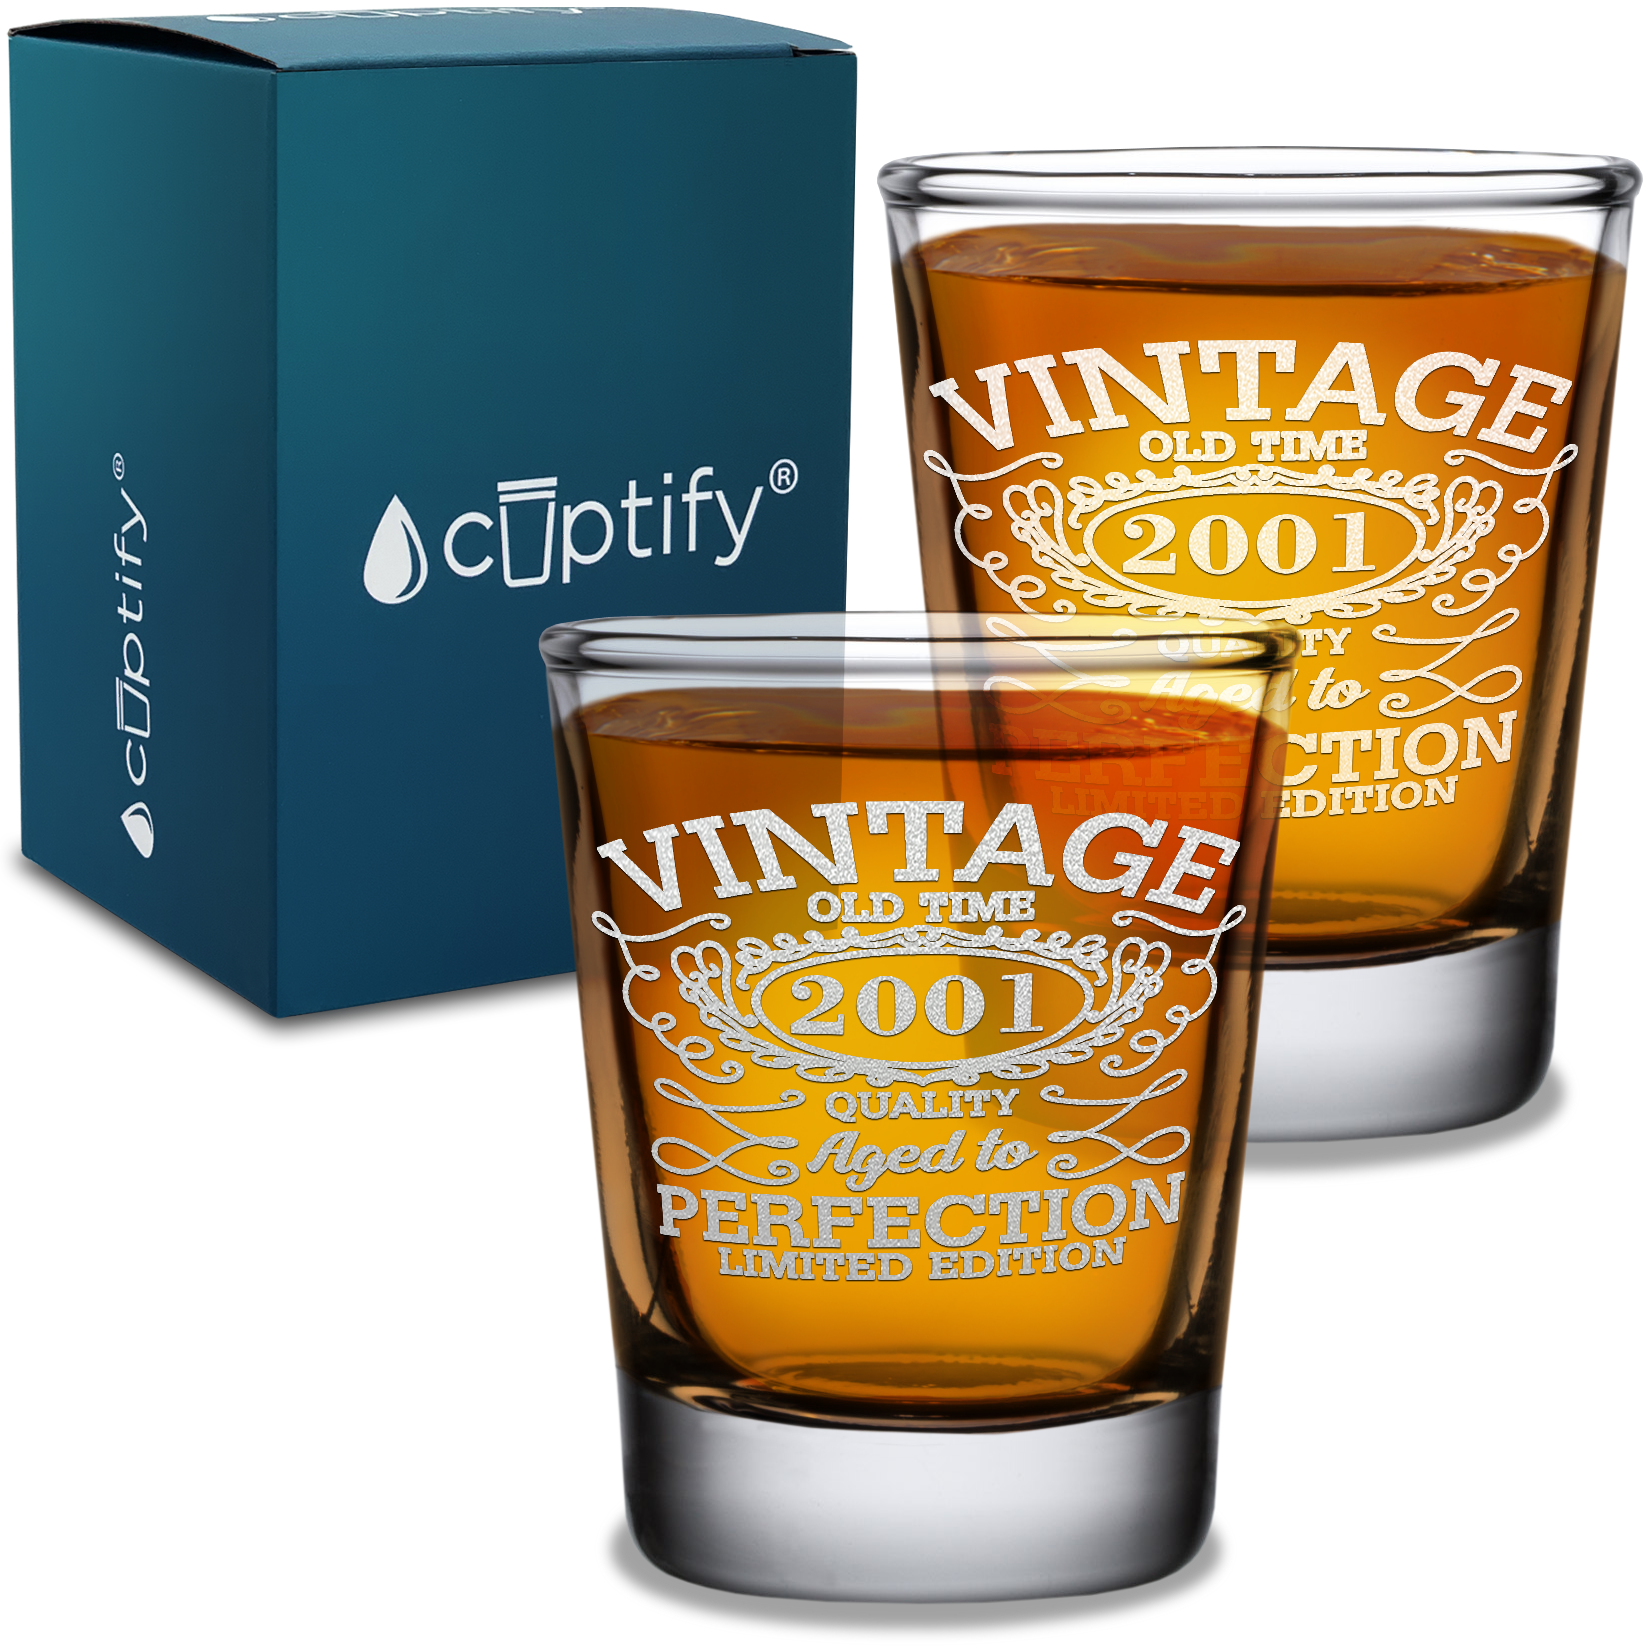 20th Birthday Vintage 20 Years Old Time 2001 Quality Laser Engraved 2oz Shot Glasses - Set of 2